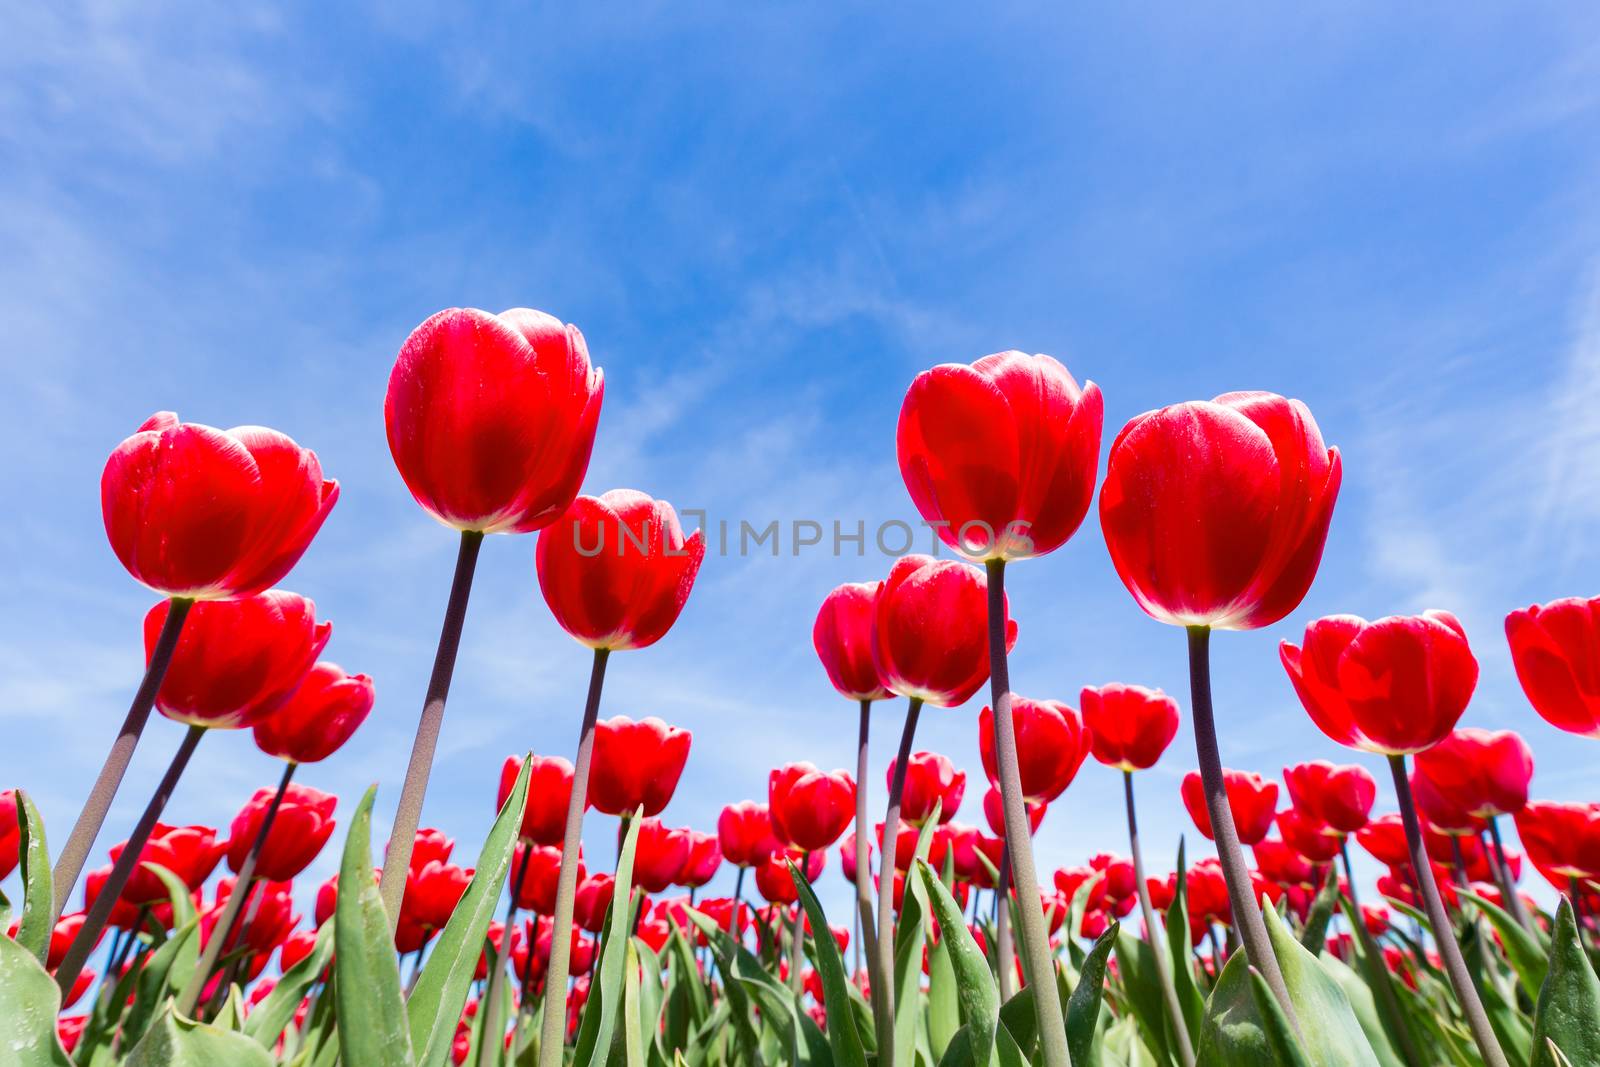 Red tulips field showing flowers close up from below with blue sky in spring season